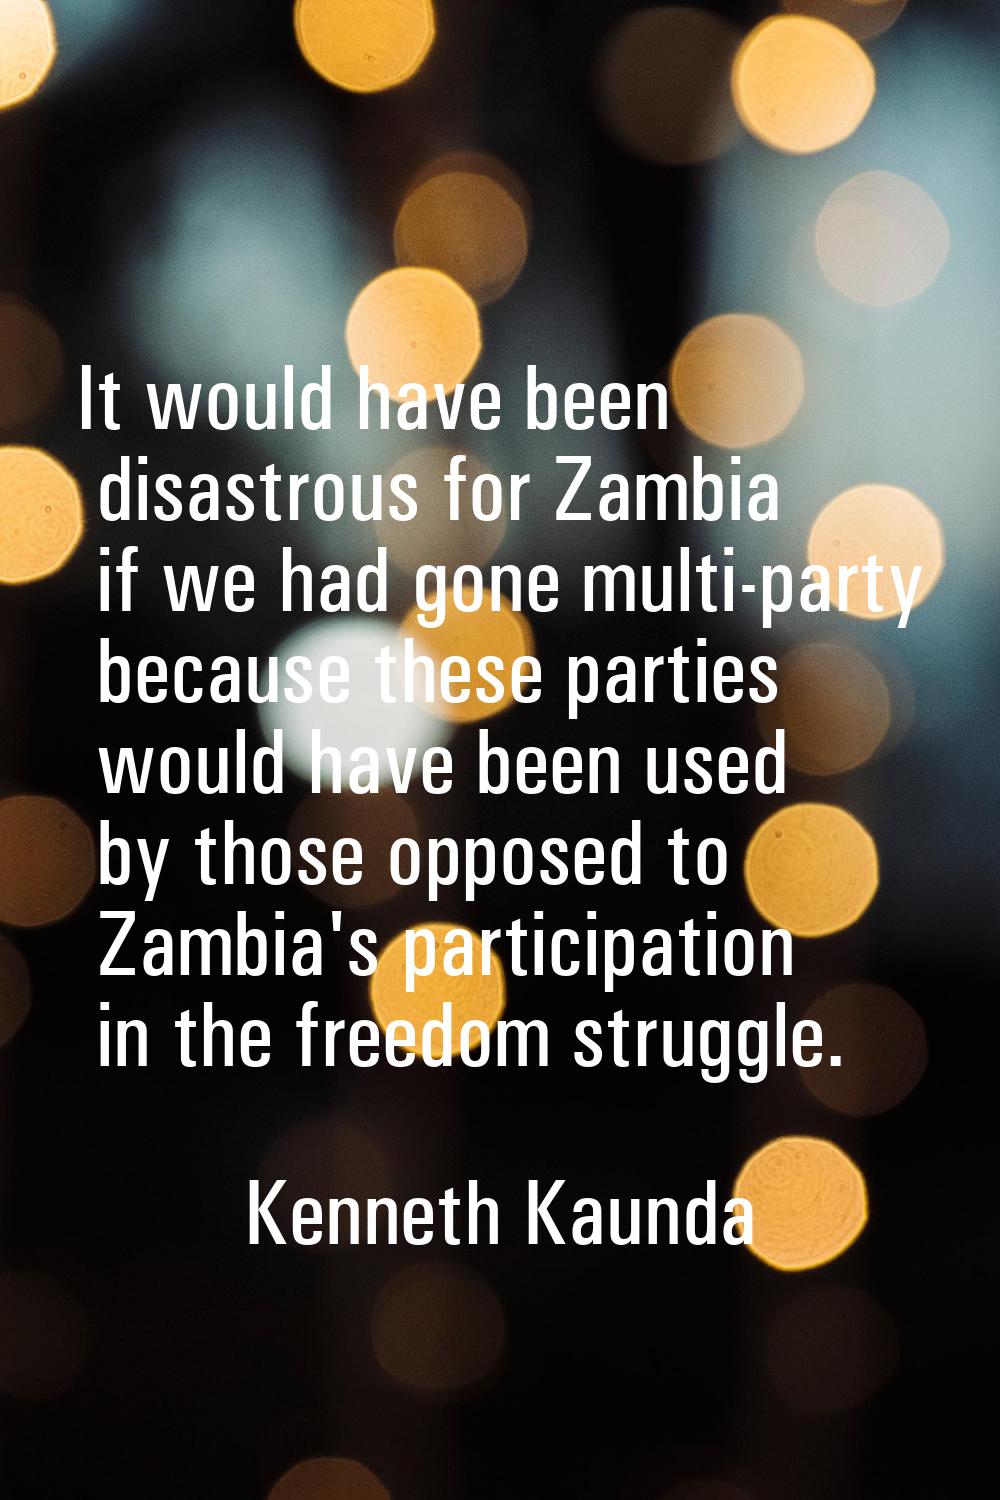 It would have been disastrous for Zambia if we had gone multi-party because these parties would hav